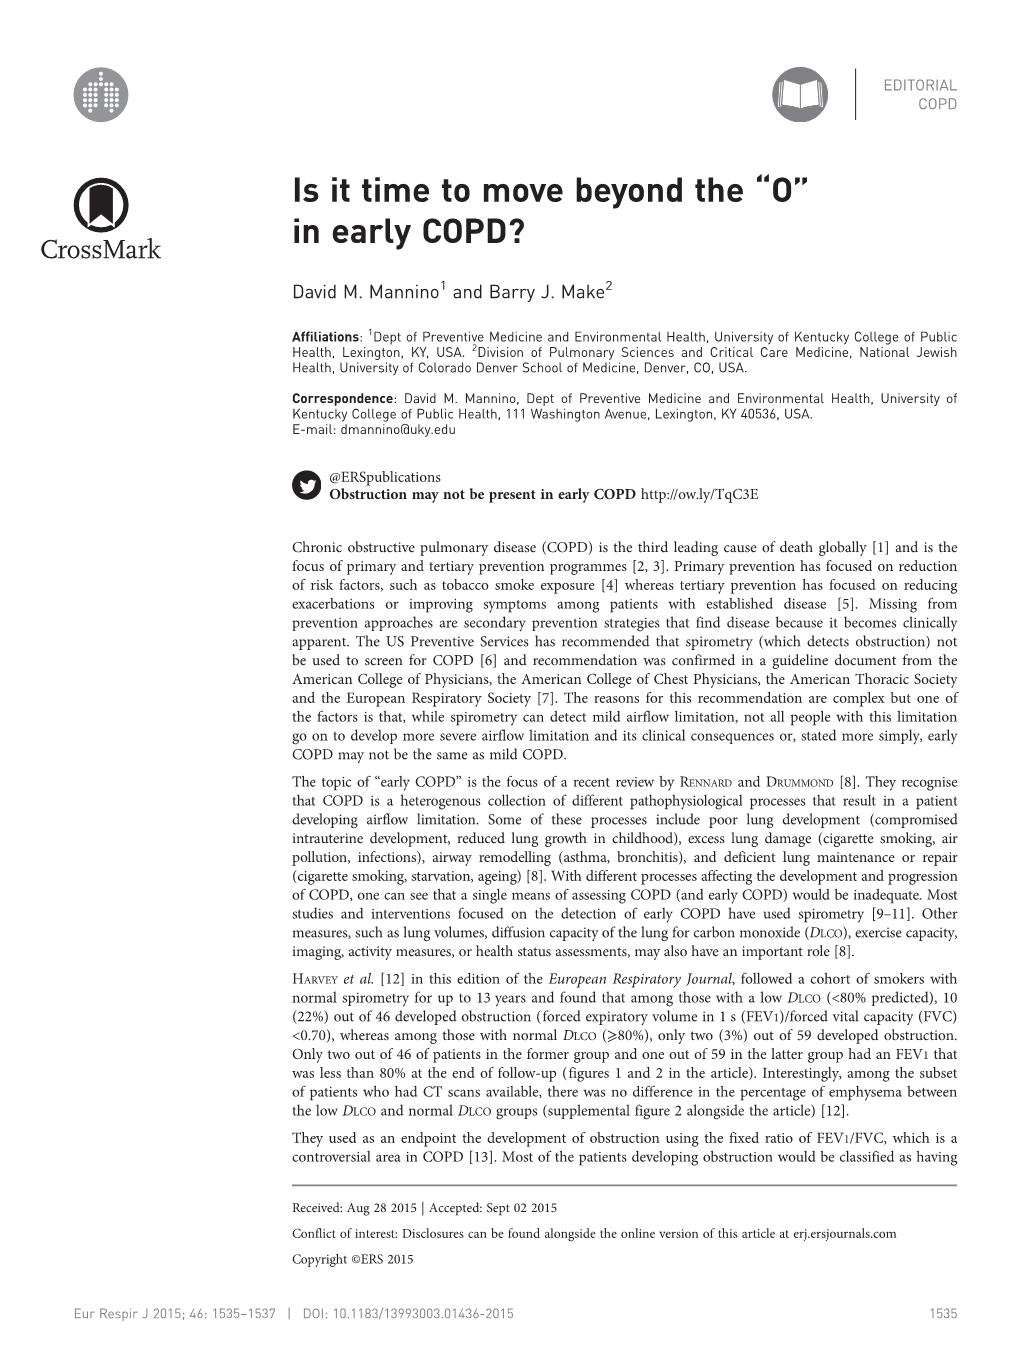 In Early COPD?